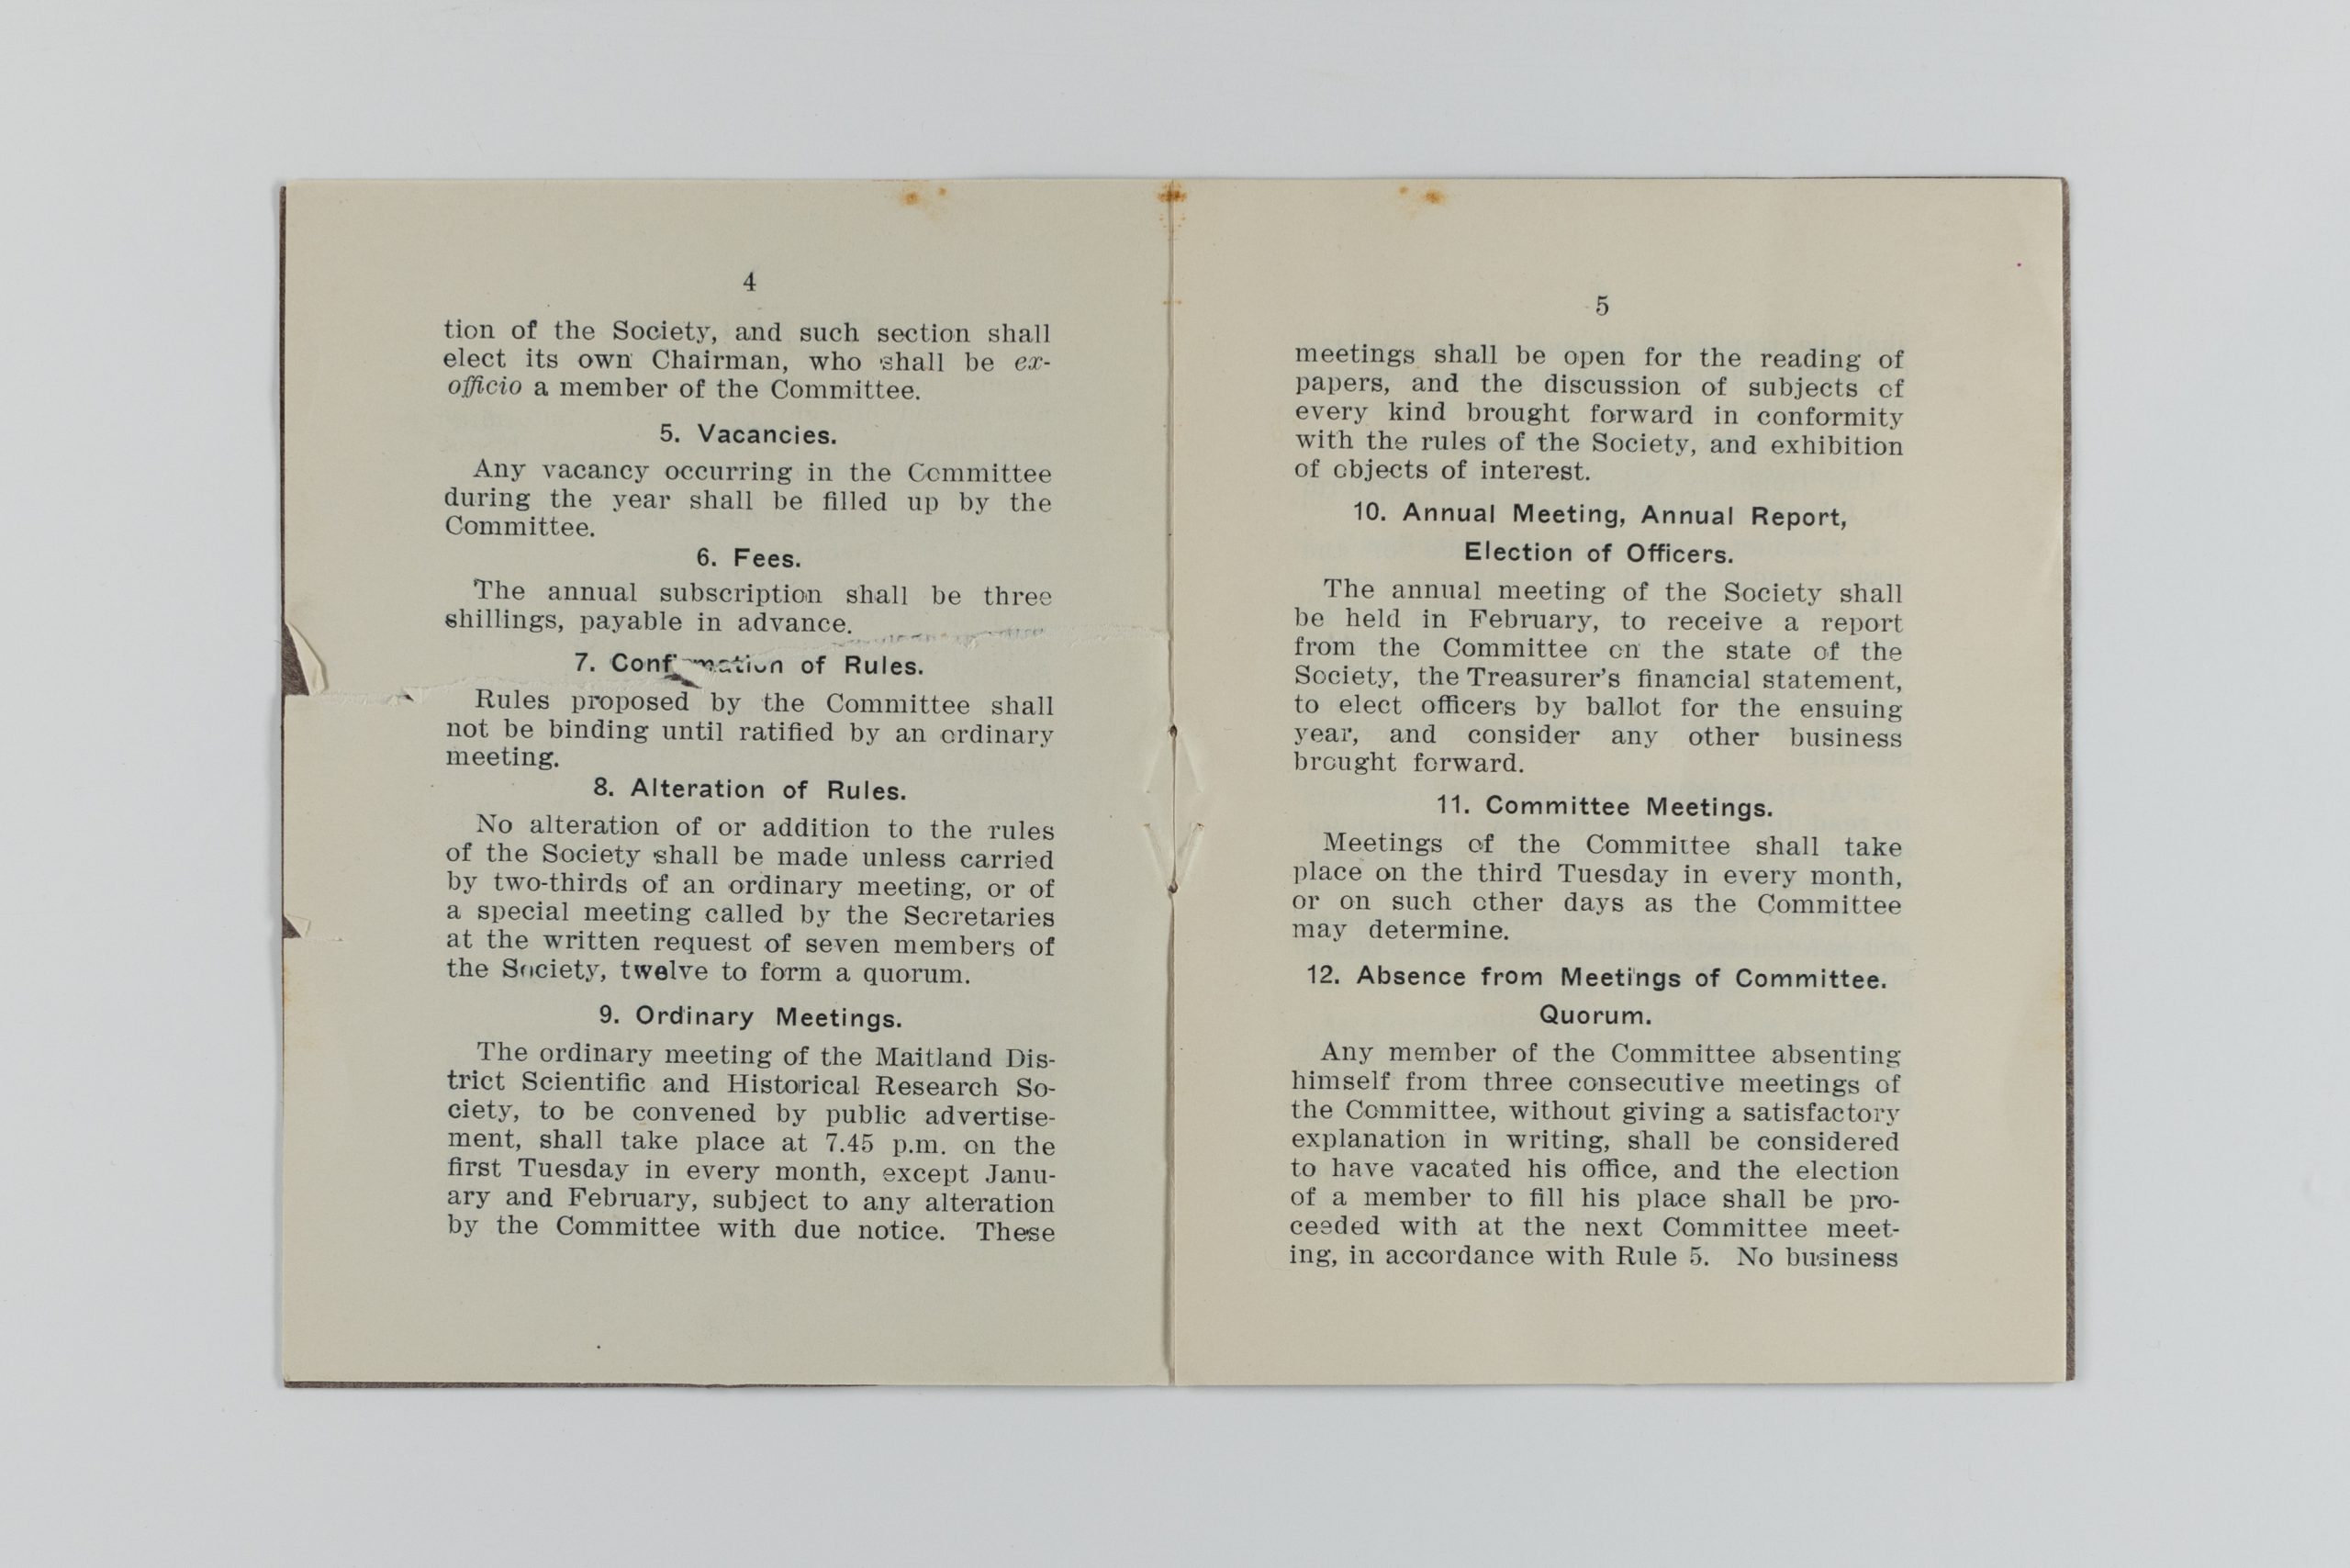 Printed book open to pages showcasing rules 5-12, including vacancies, fees, confirming/altering rules, ordinary/annual/comittee meetings, and absence from such meetings.